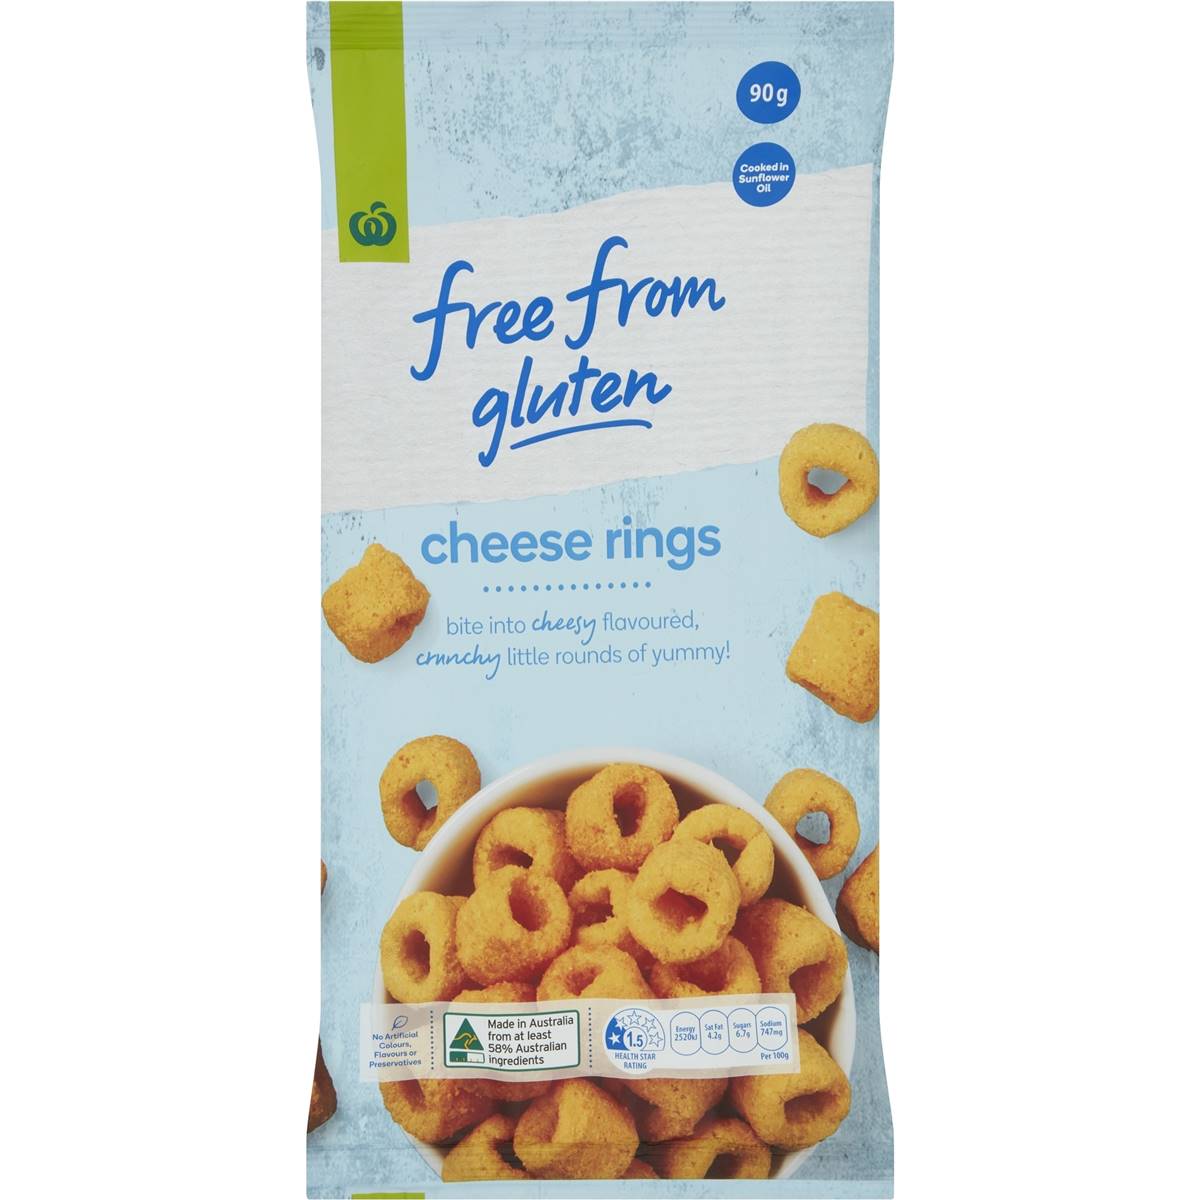 Calories in Woolworths Free From Gluten Share Pack Cheese Rings